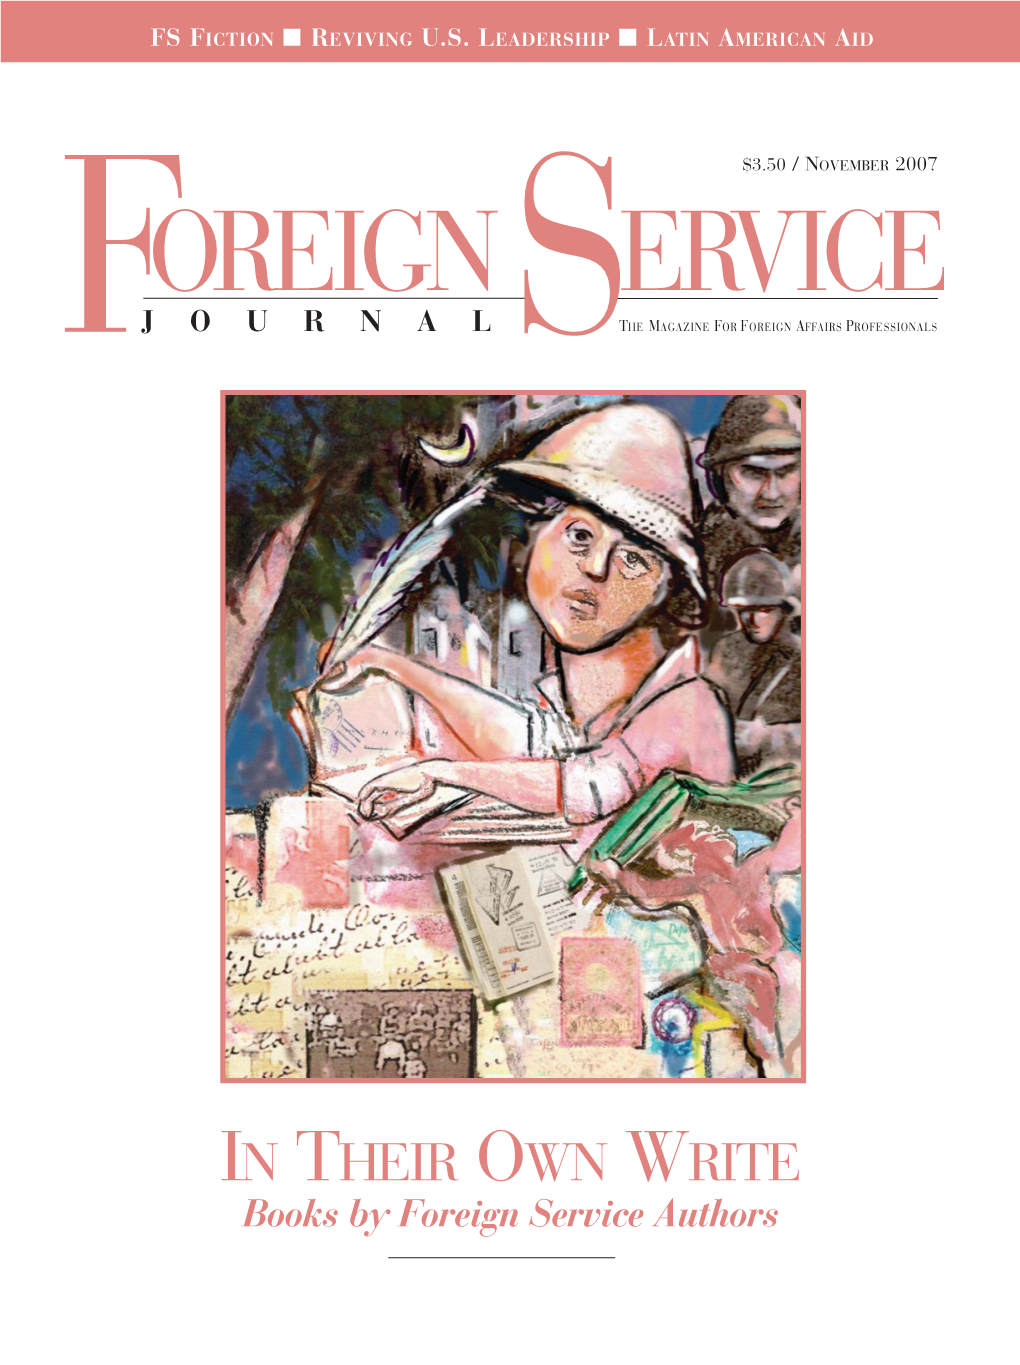 The Foreign Service Journal, November 2007